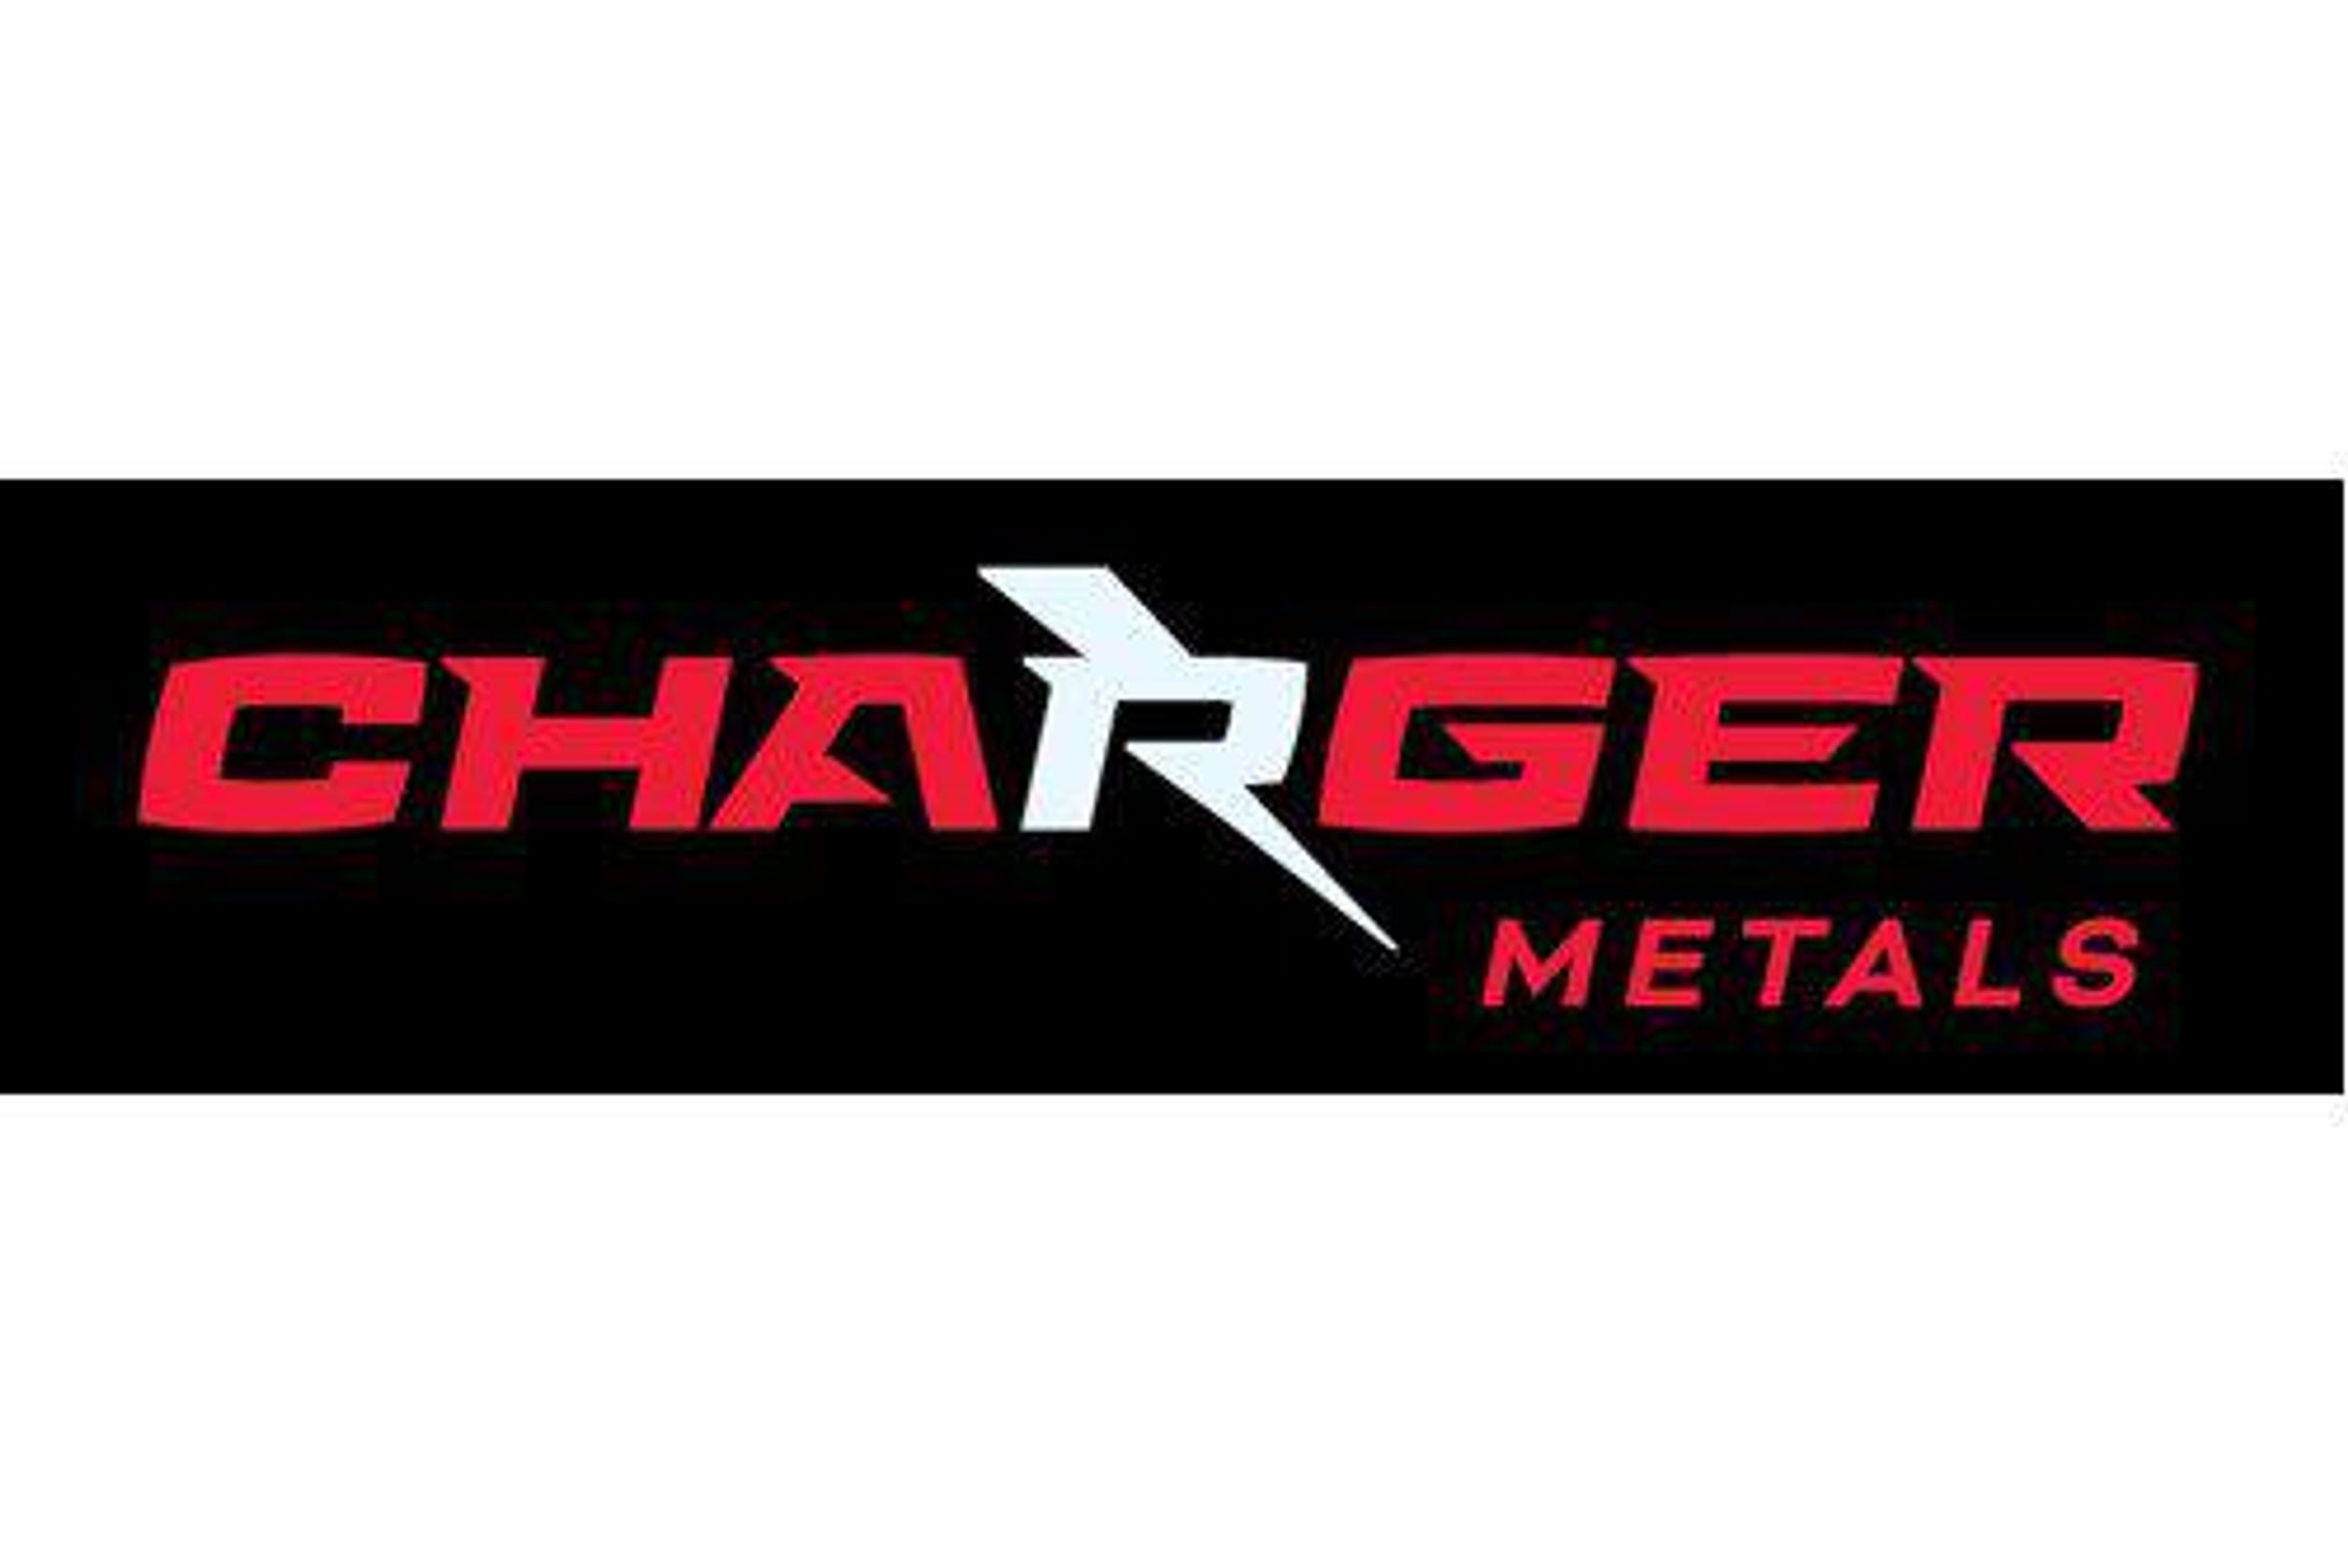 Charger metals